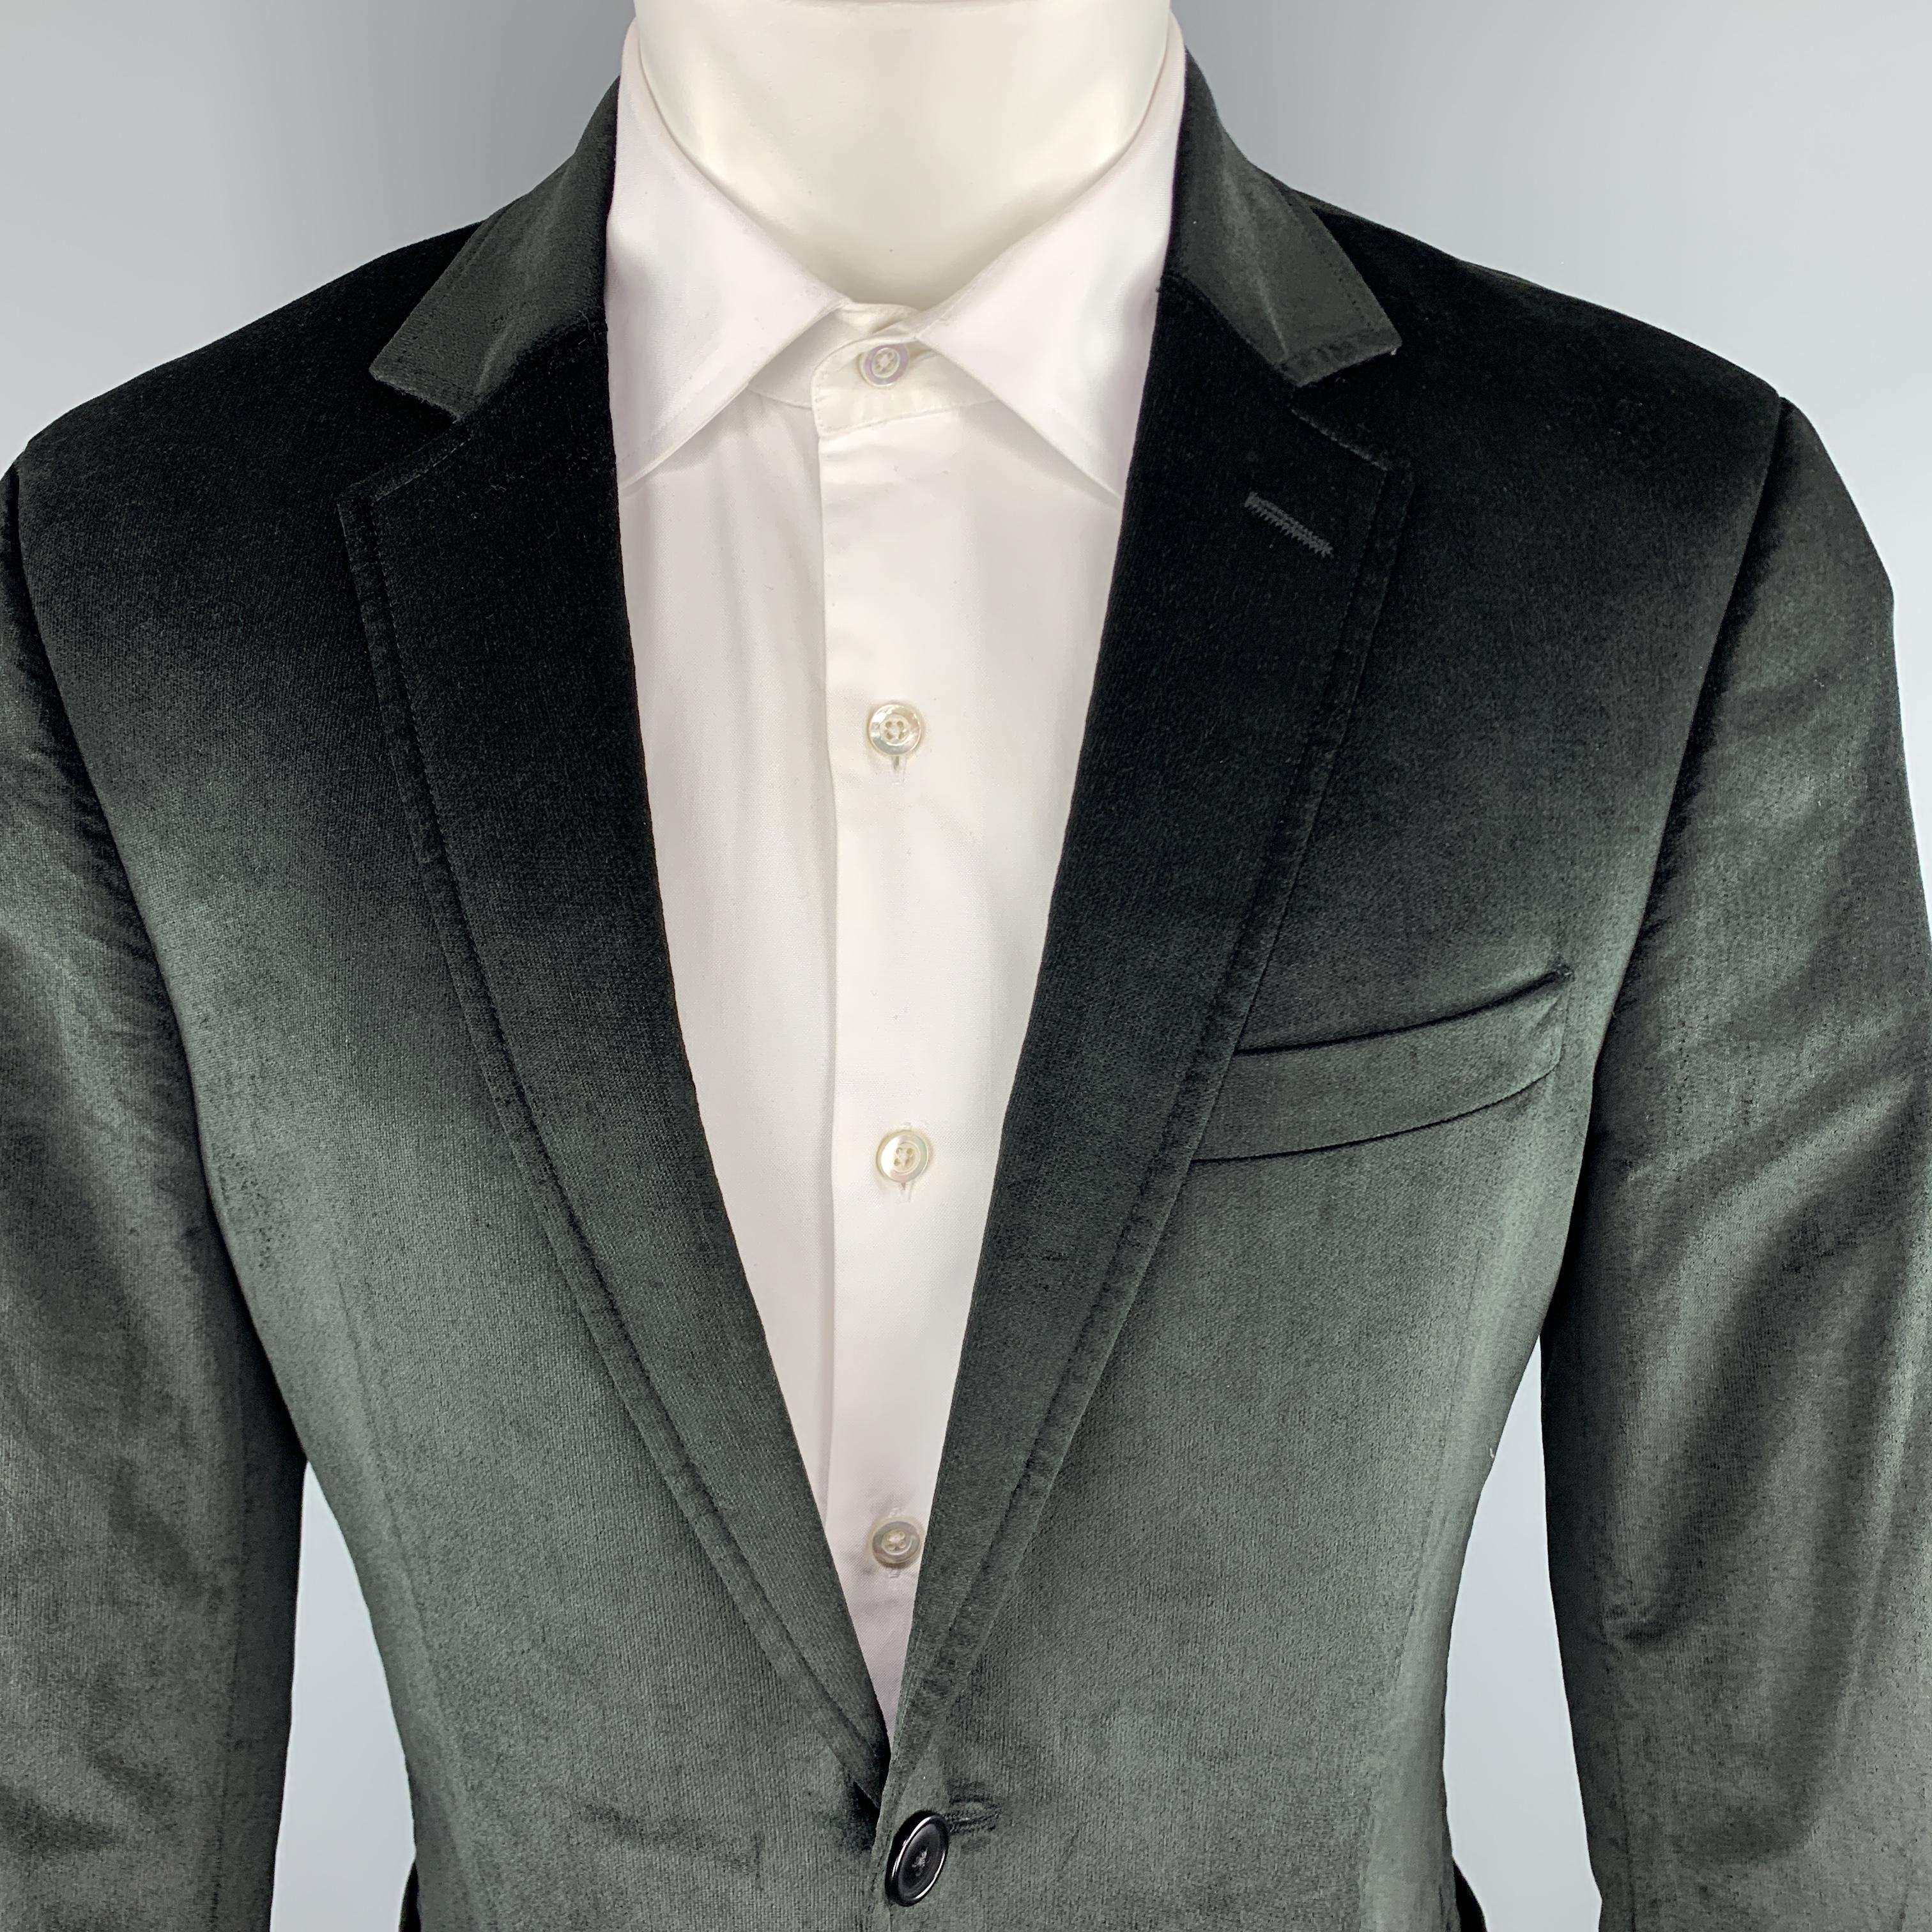 THEORY sport coat comes in black velvet with a notch lapel, single breasted, two button front, and patch pockets. Made in Canada.

Very Good Pre-Owned Condition.
Marked: 40 REG

Measurements:

Shoulder: 18 in.
Chest: 42 in.
Sleeve: 25 in. 
Length: